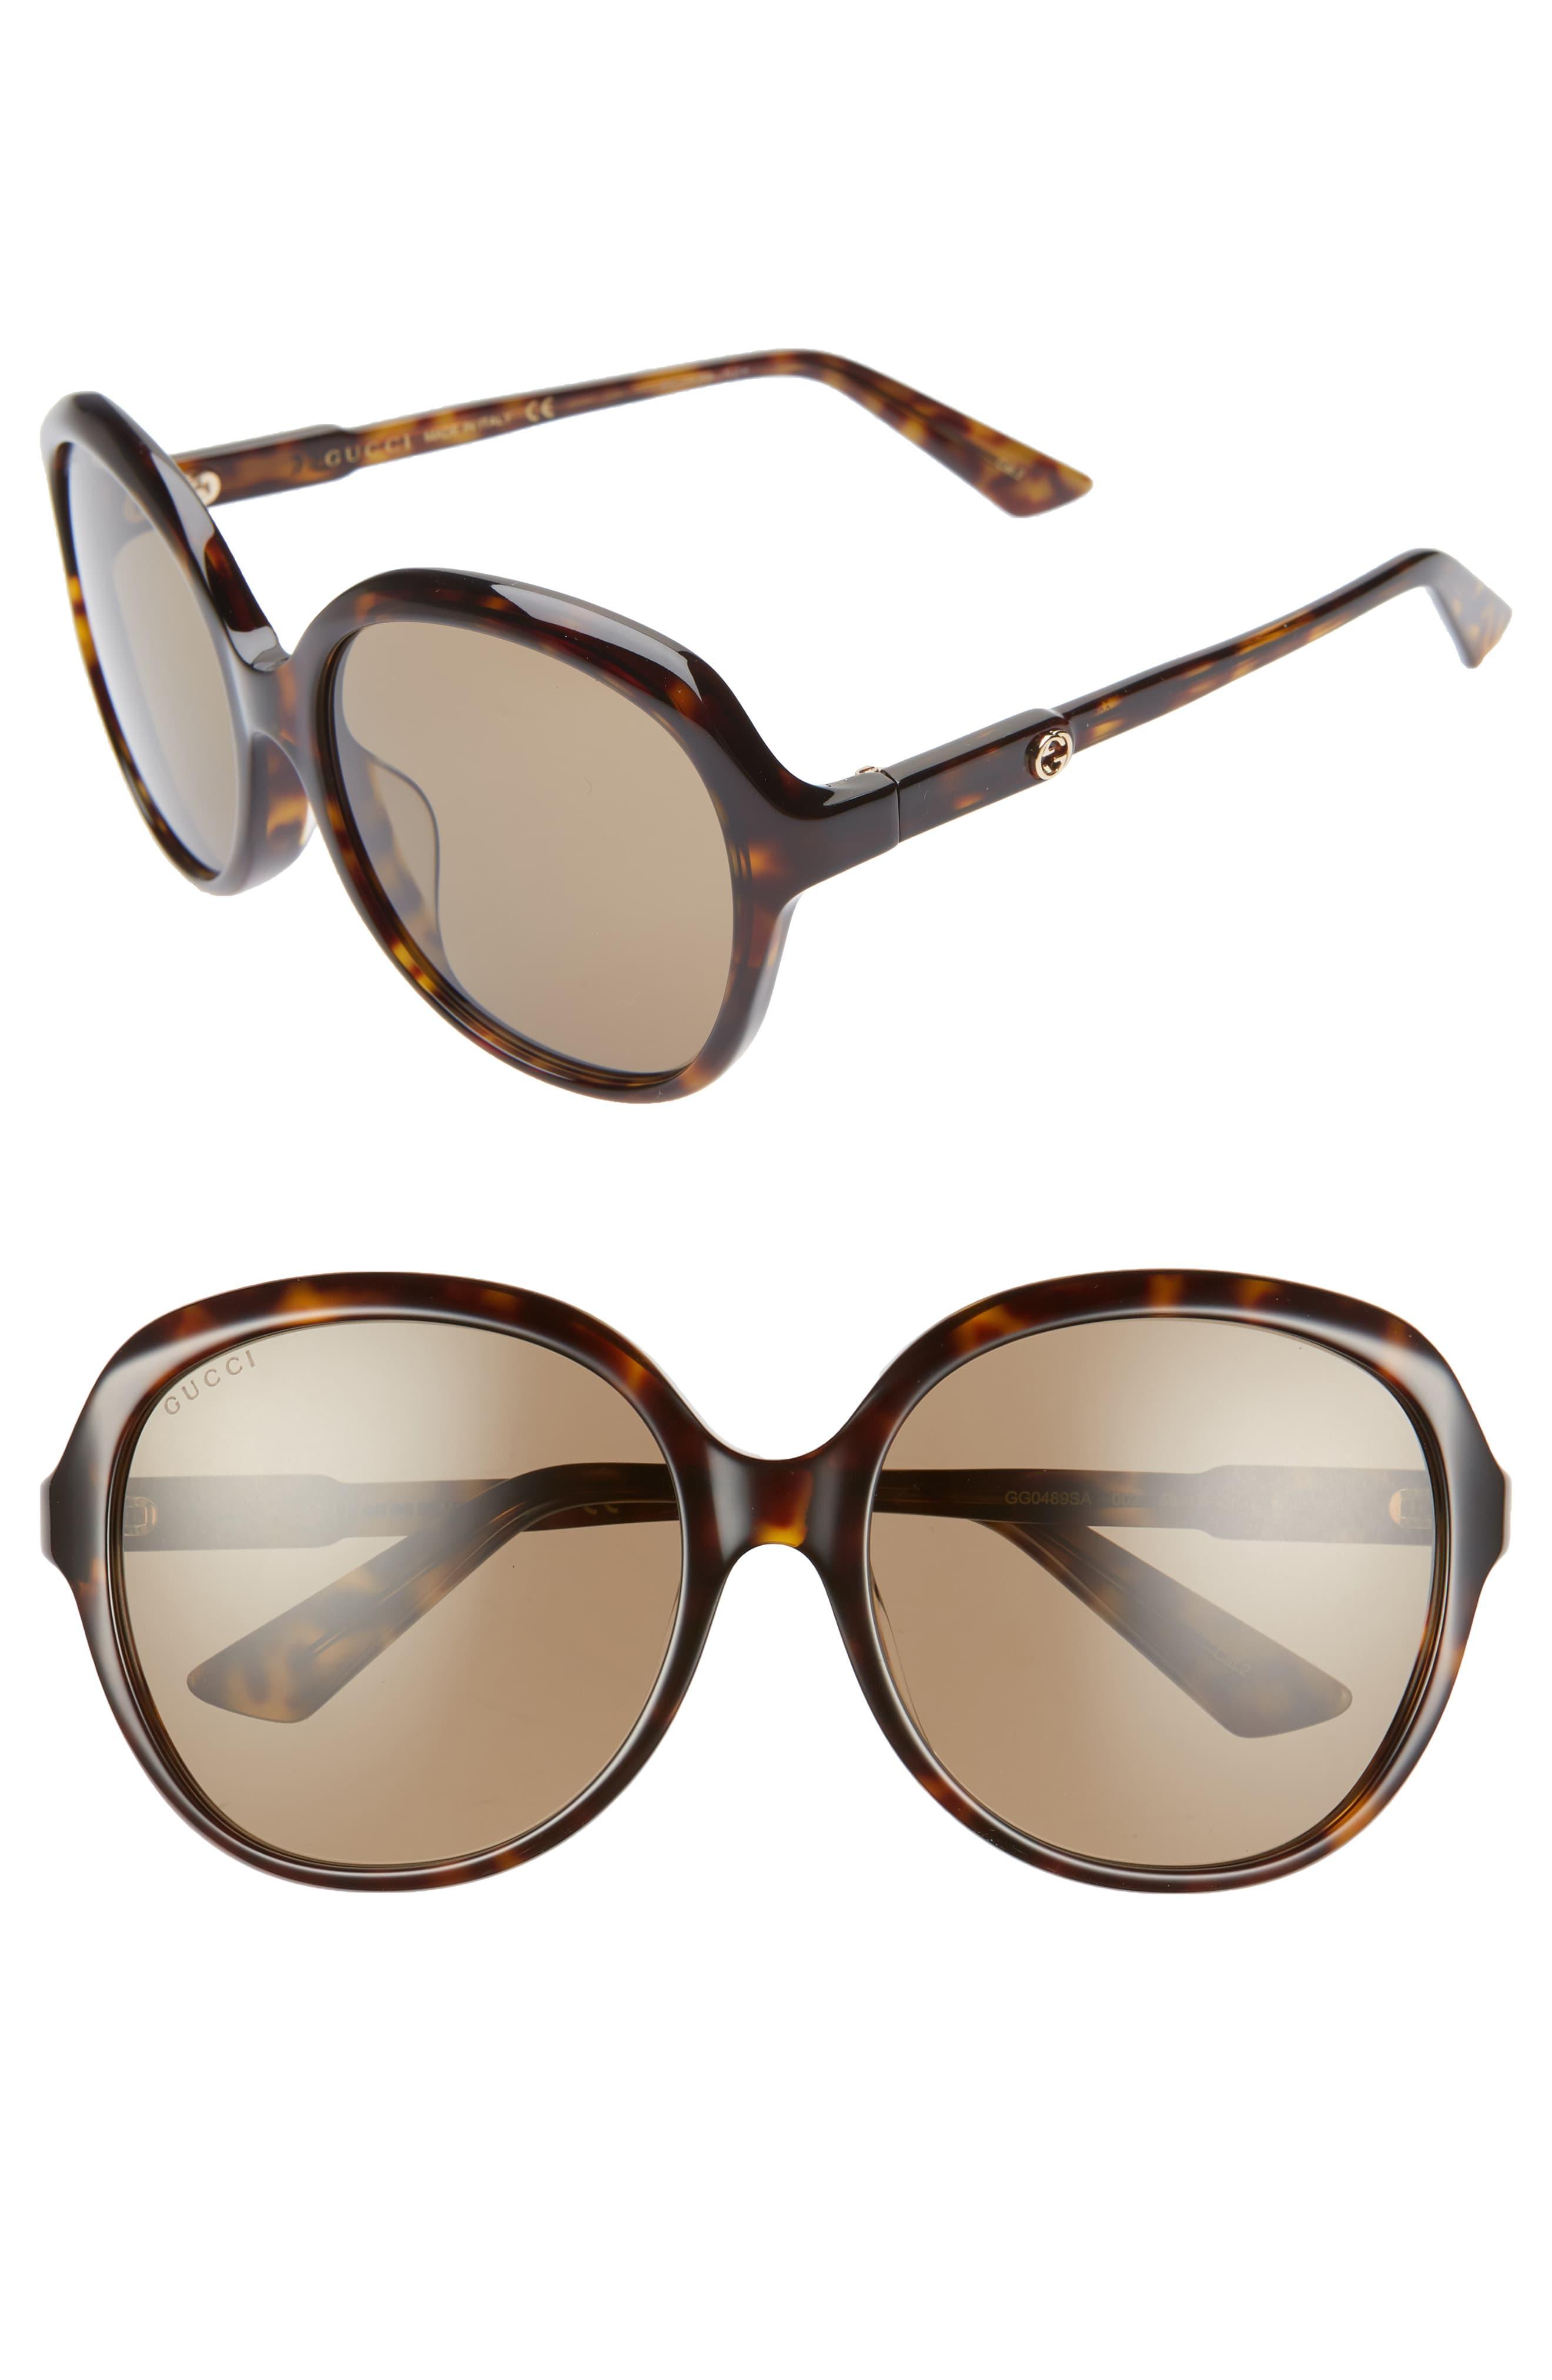 Gucci 58mm Round Sunglasses - Havana/ Solid Brown in Brown - Lyst